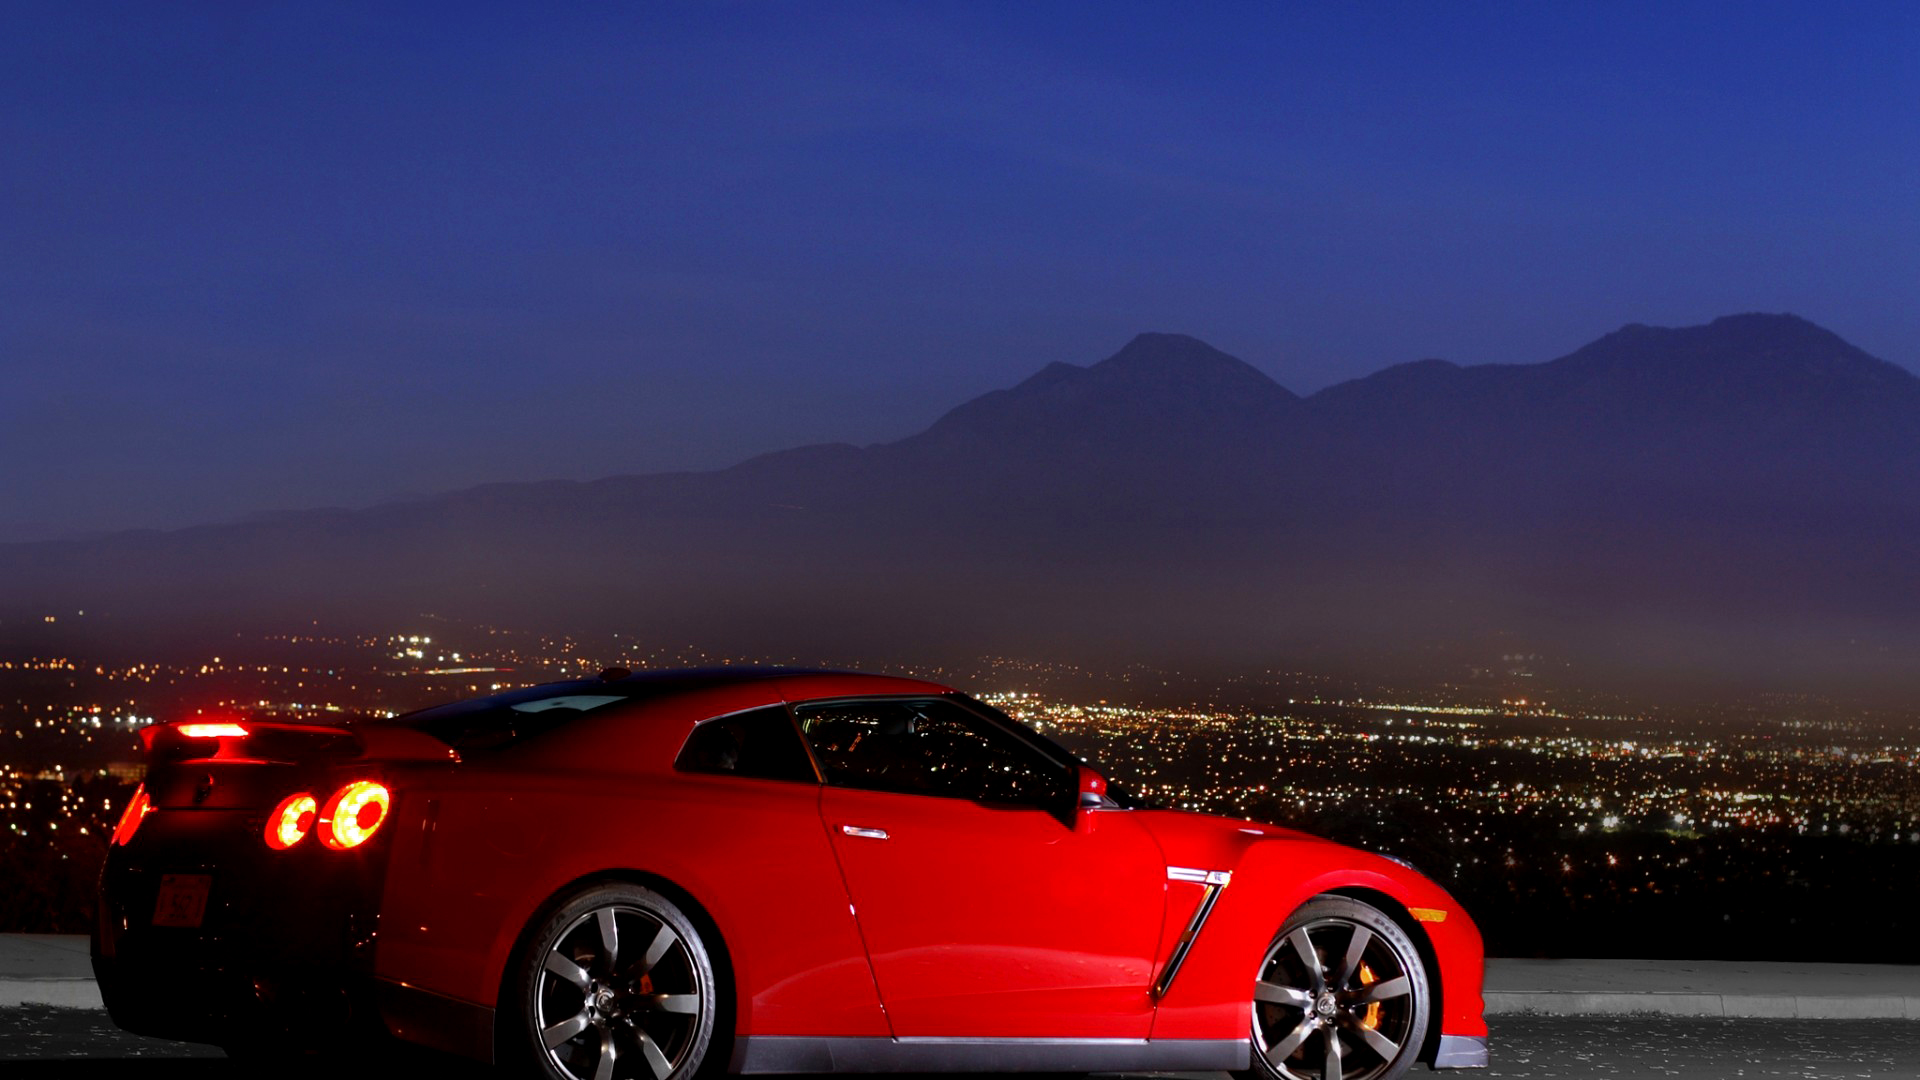 Nissan, Nissan GT R, Night, Car, Red Cars, Lights, Mountain Wallpapers